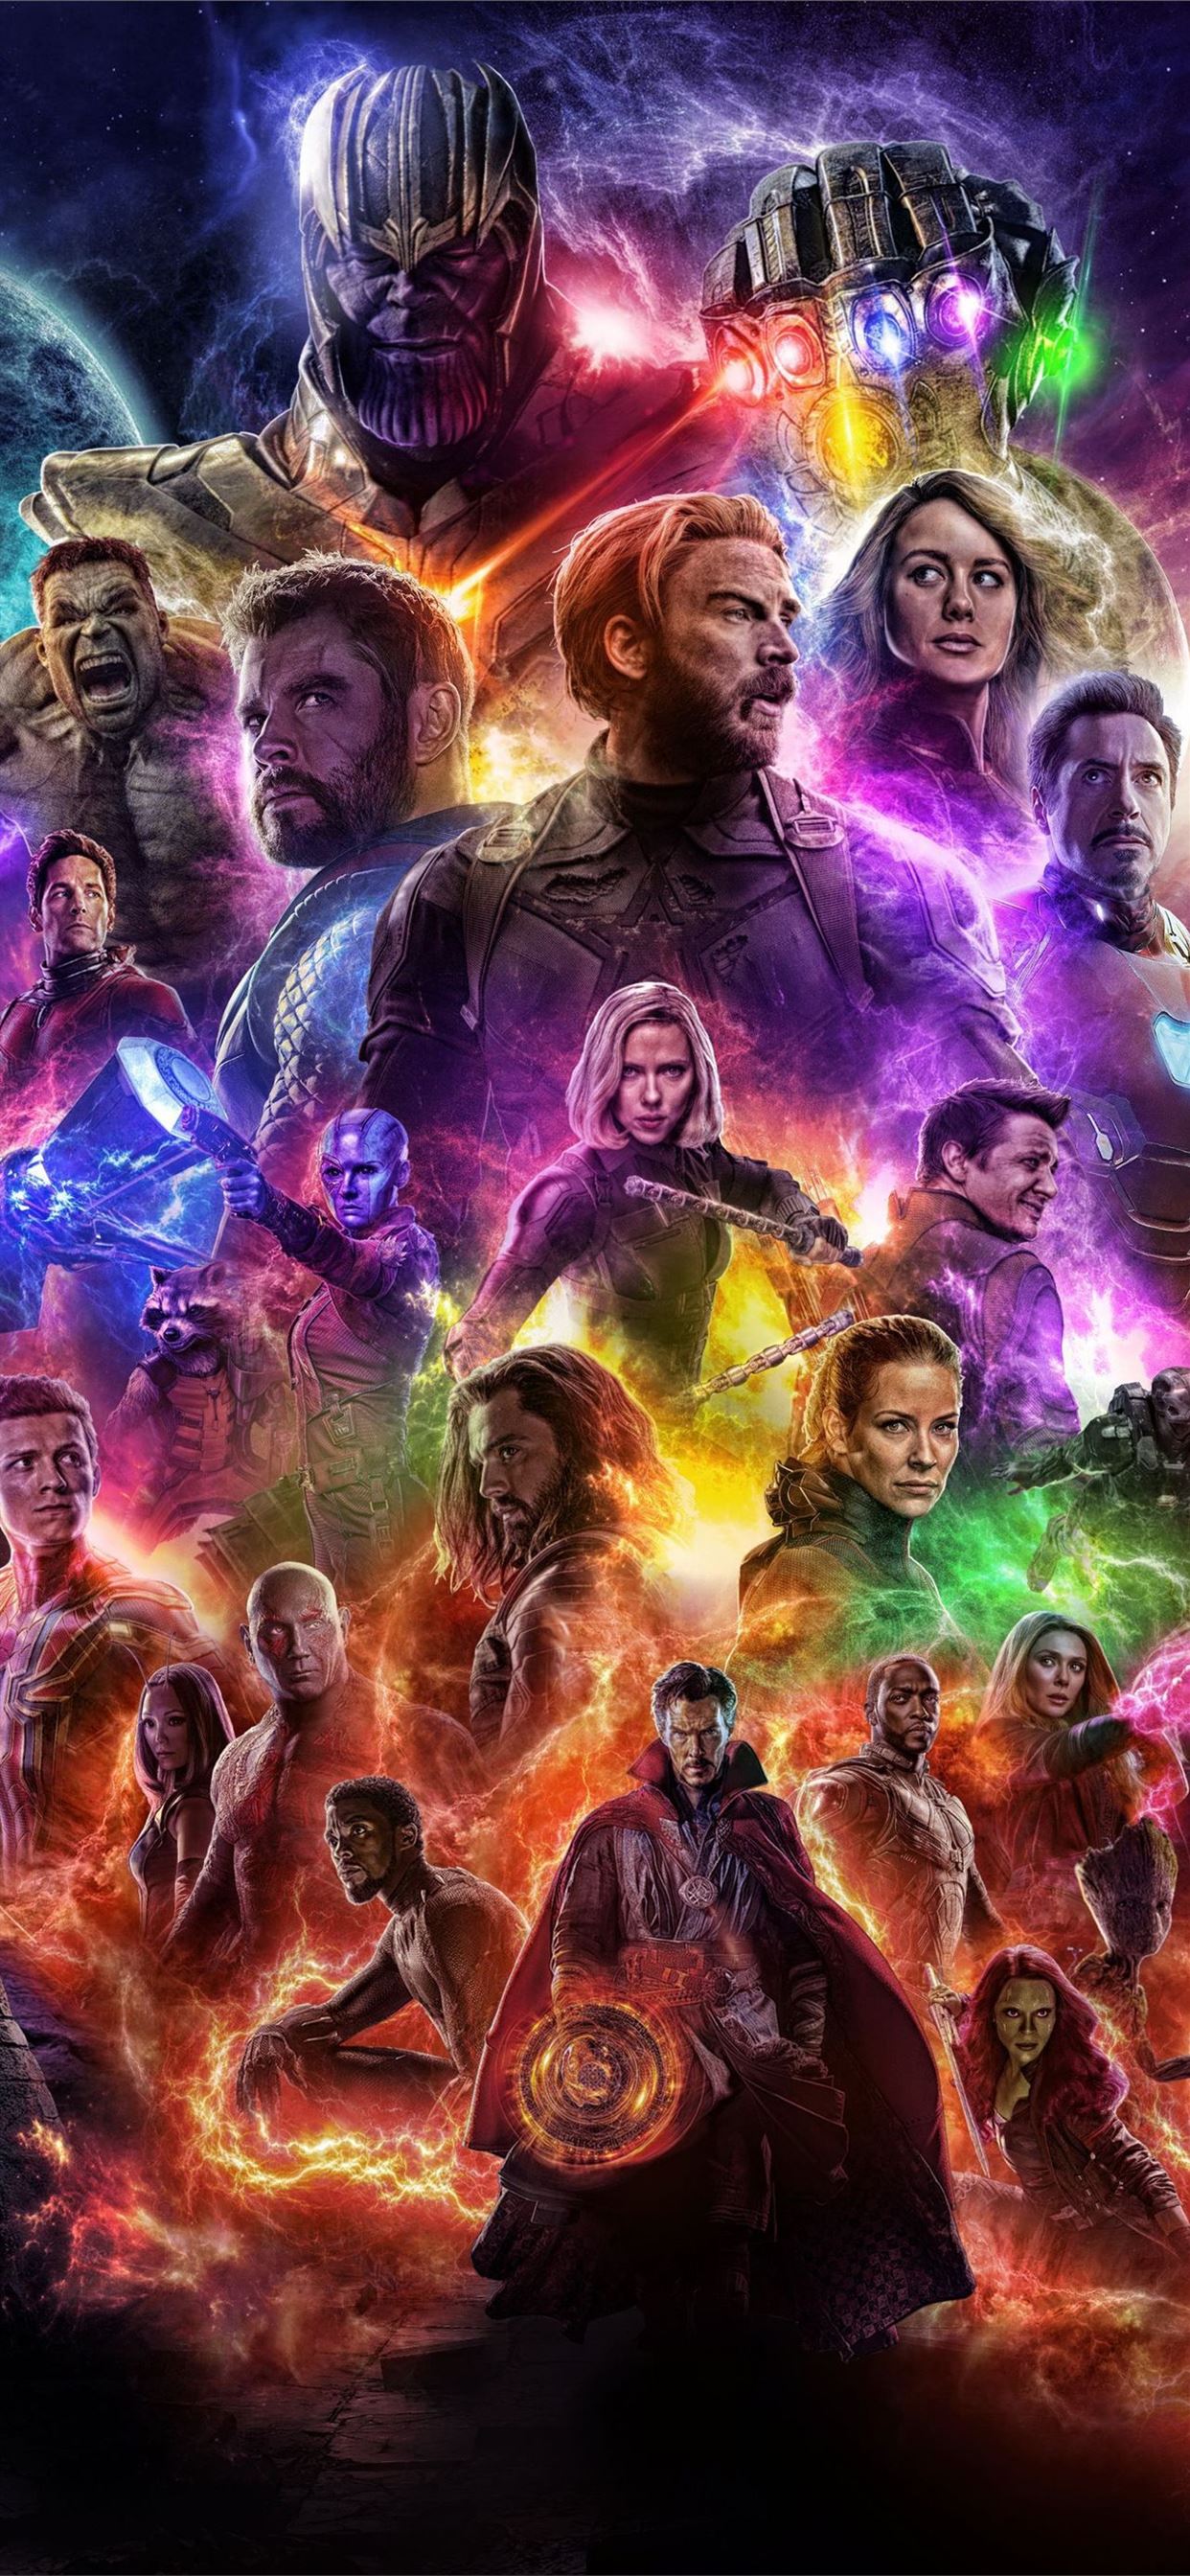 Avengers End Game Thanos with all stones vs superh... iPhone Wallpapers  Free Download